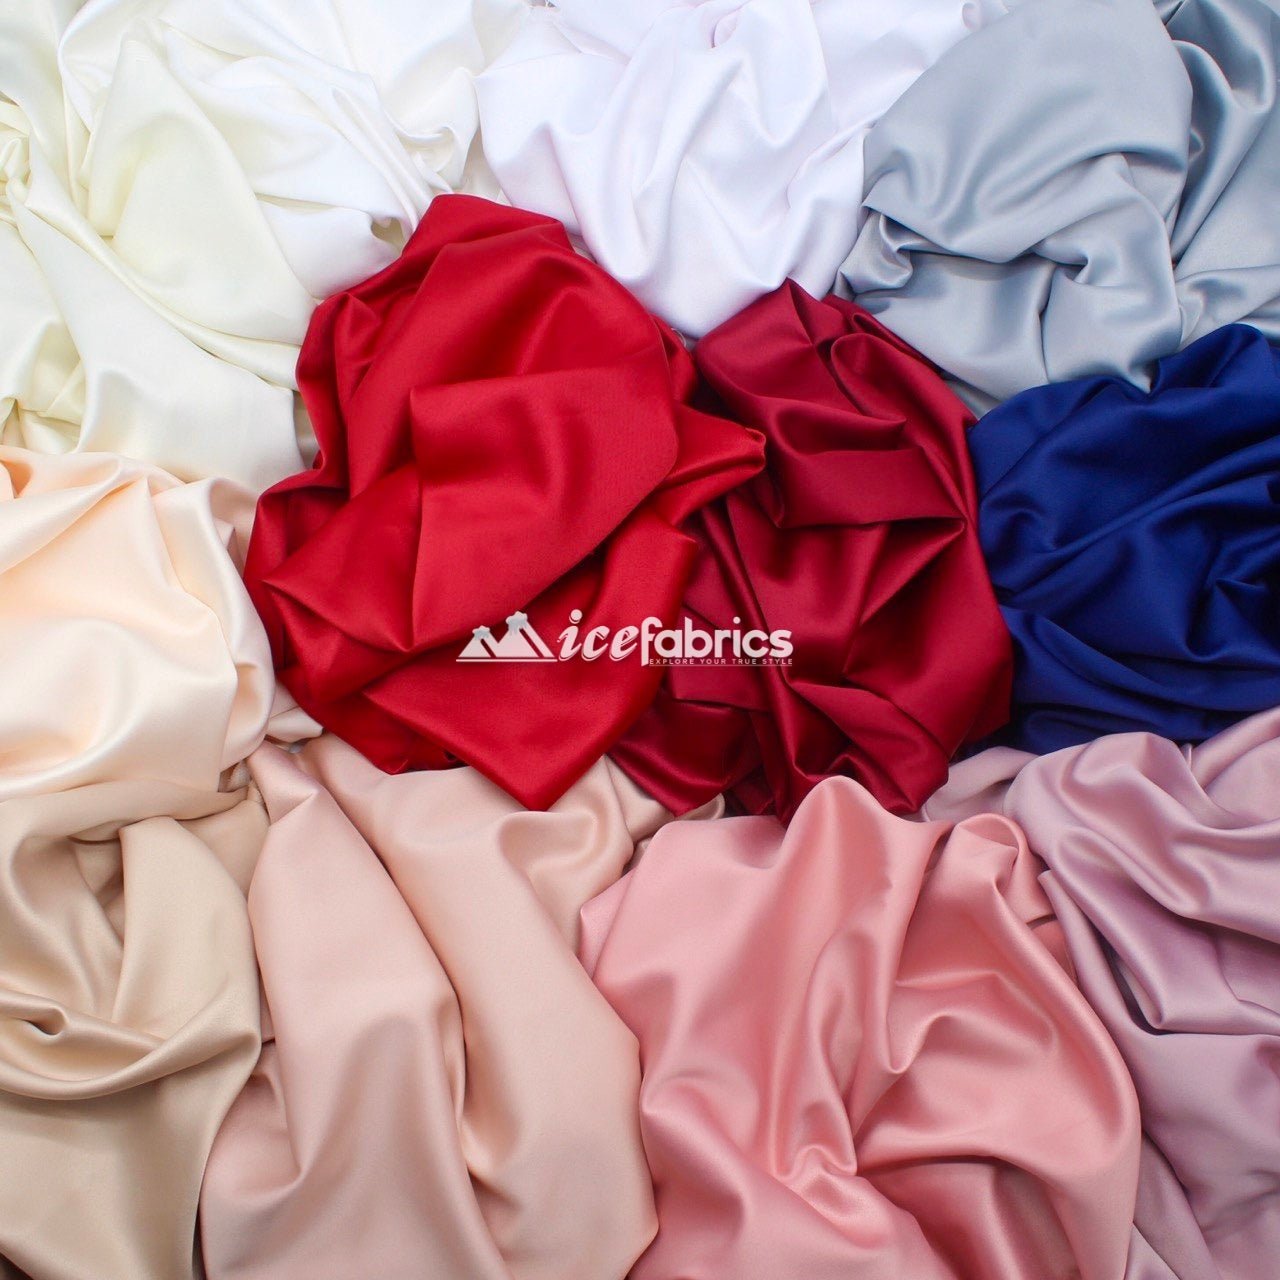 Armani Thick Solid Color Silky Stretch Satin Fabric Sold By The YardSatin FabricICE FABRICSICE FABRICSSilverArmani Thick Solid Color Silky Stretch Satin Fabric Sold By The Yard ICE FABRICS